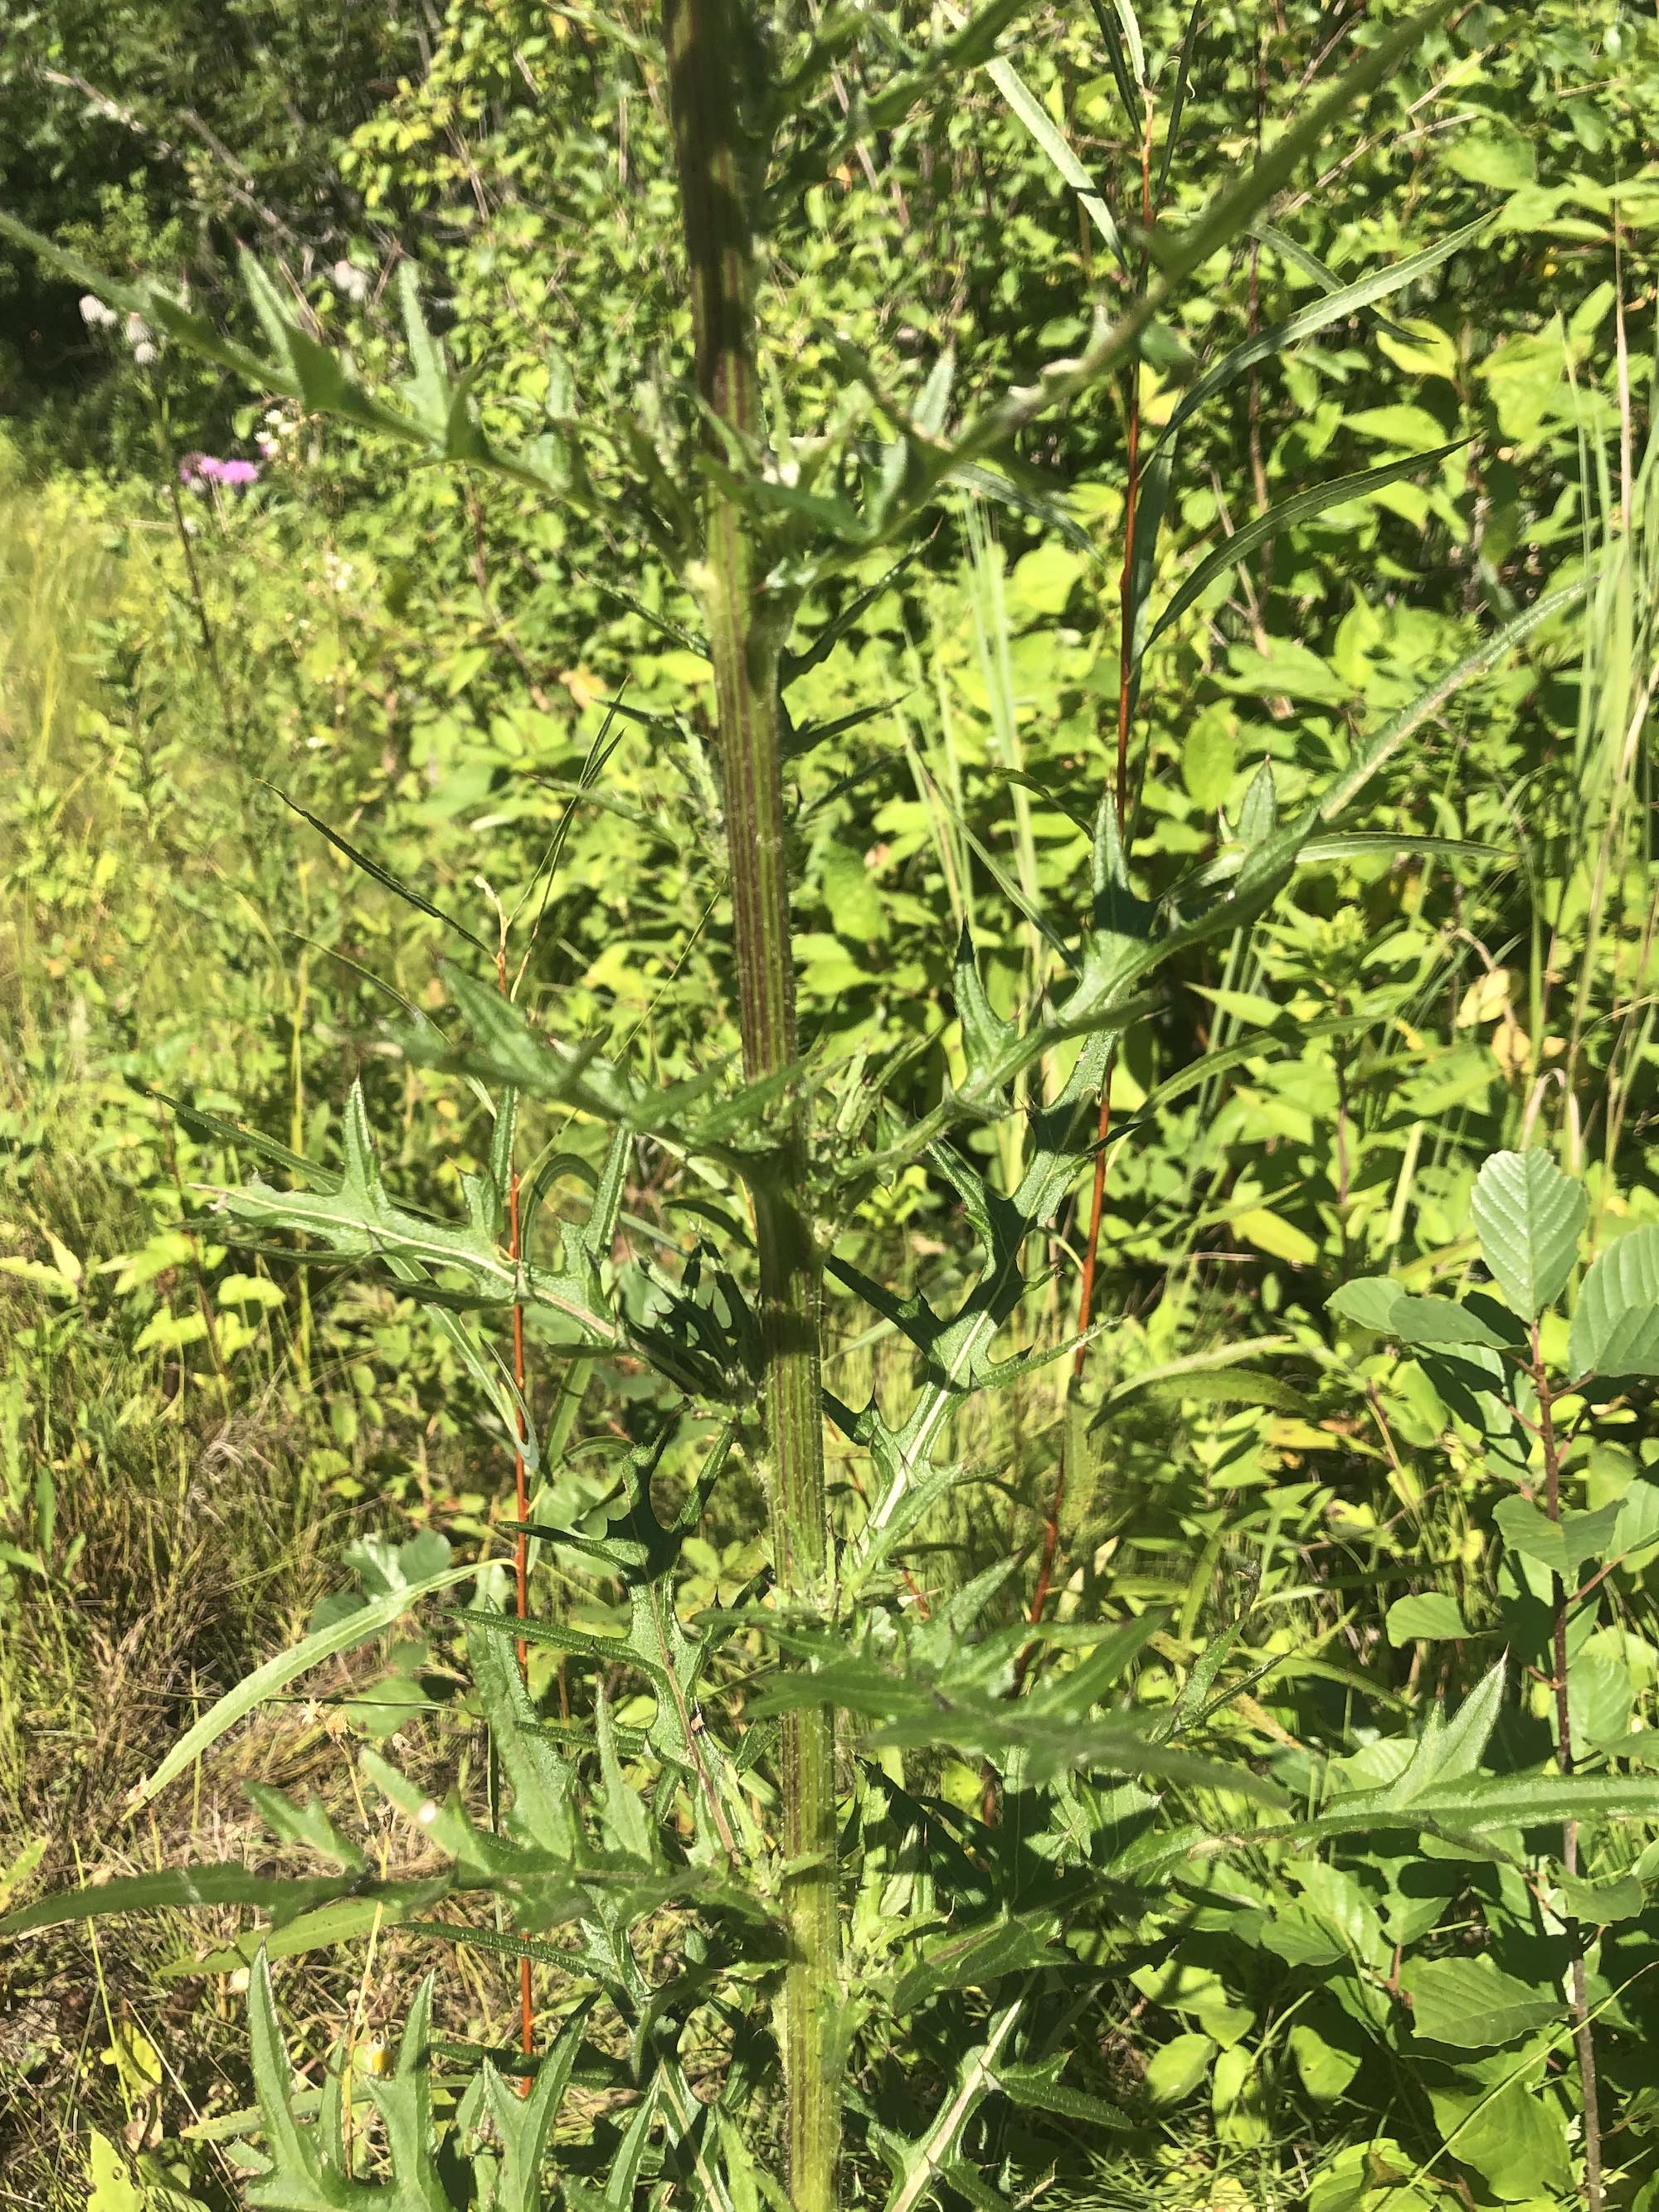 Swamp Thistle near cattails along shore of Lake Wingra along Arboretum Drive in Madison, Wisconsin on August 17, 2022.